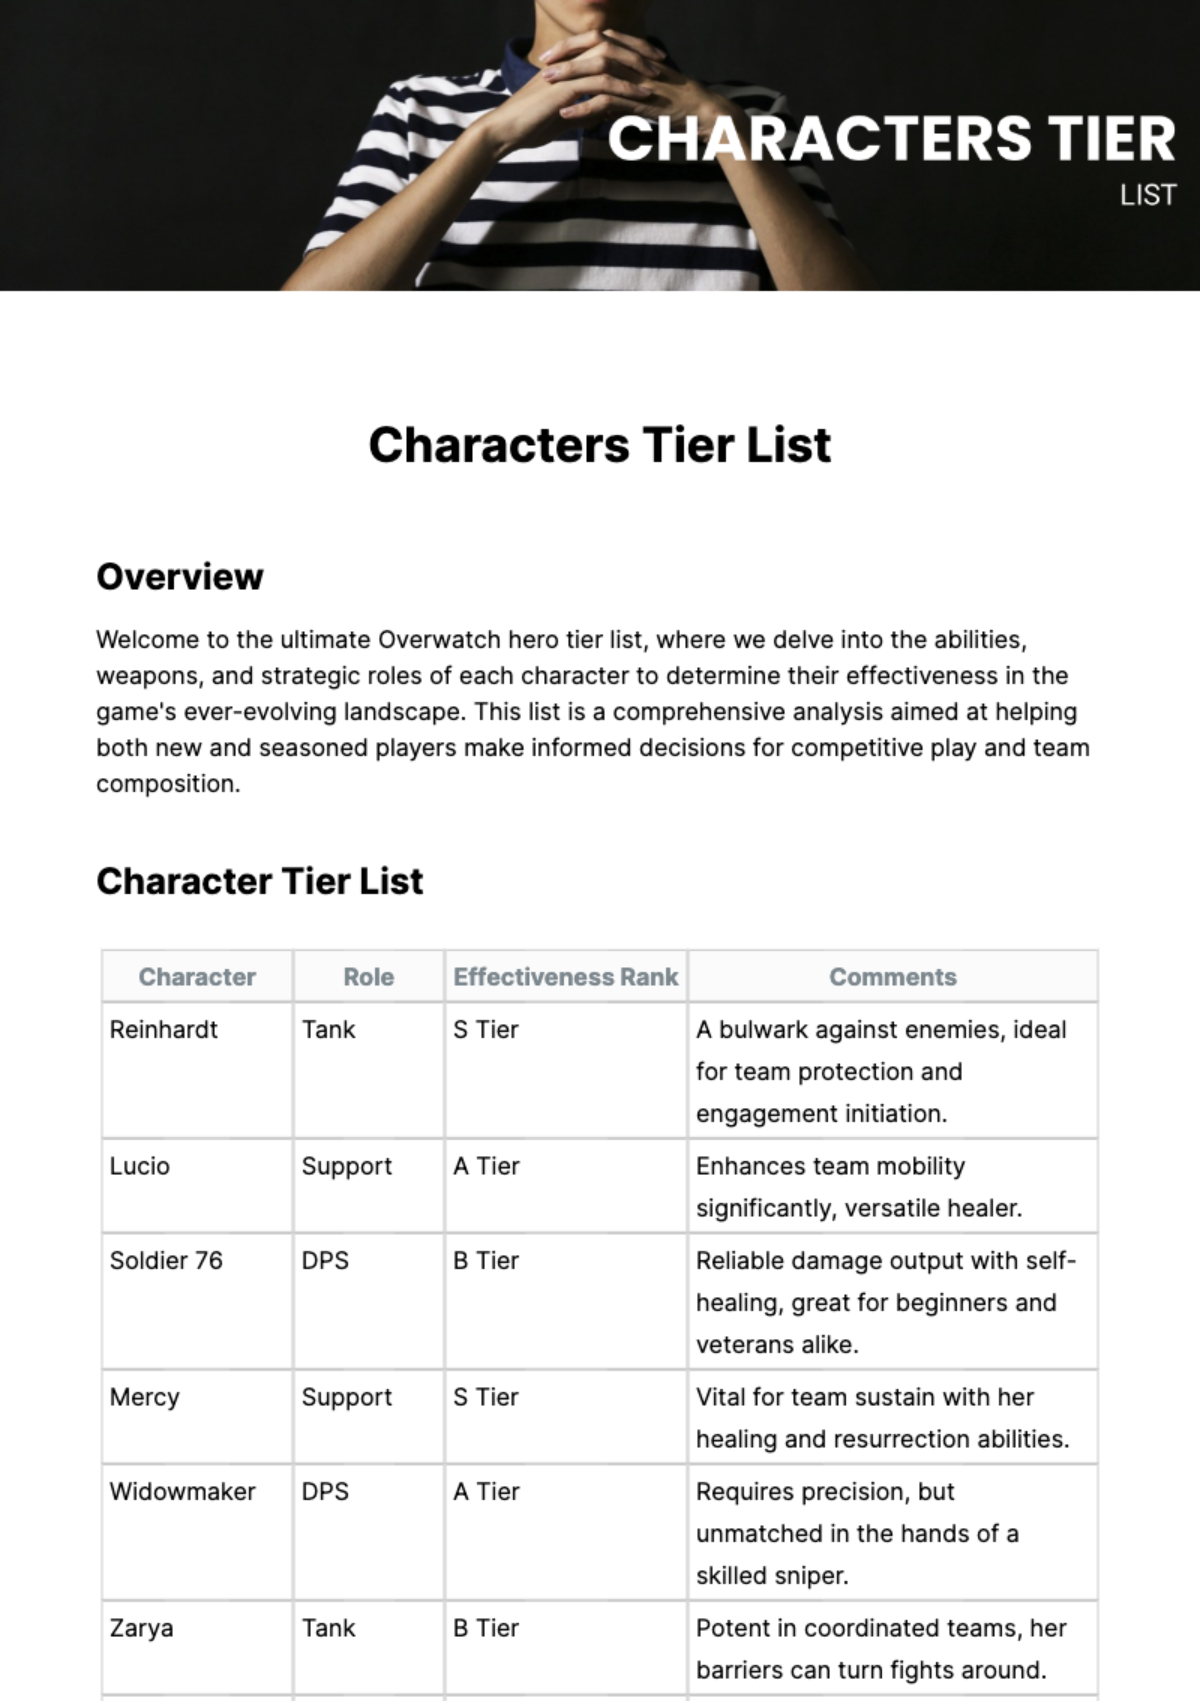 Characters Tier List Template